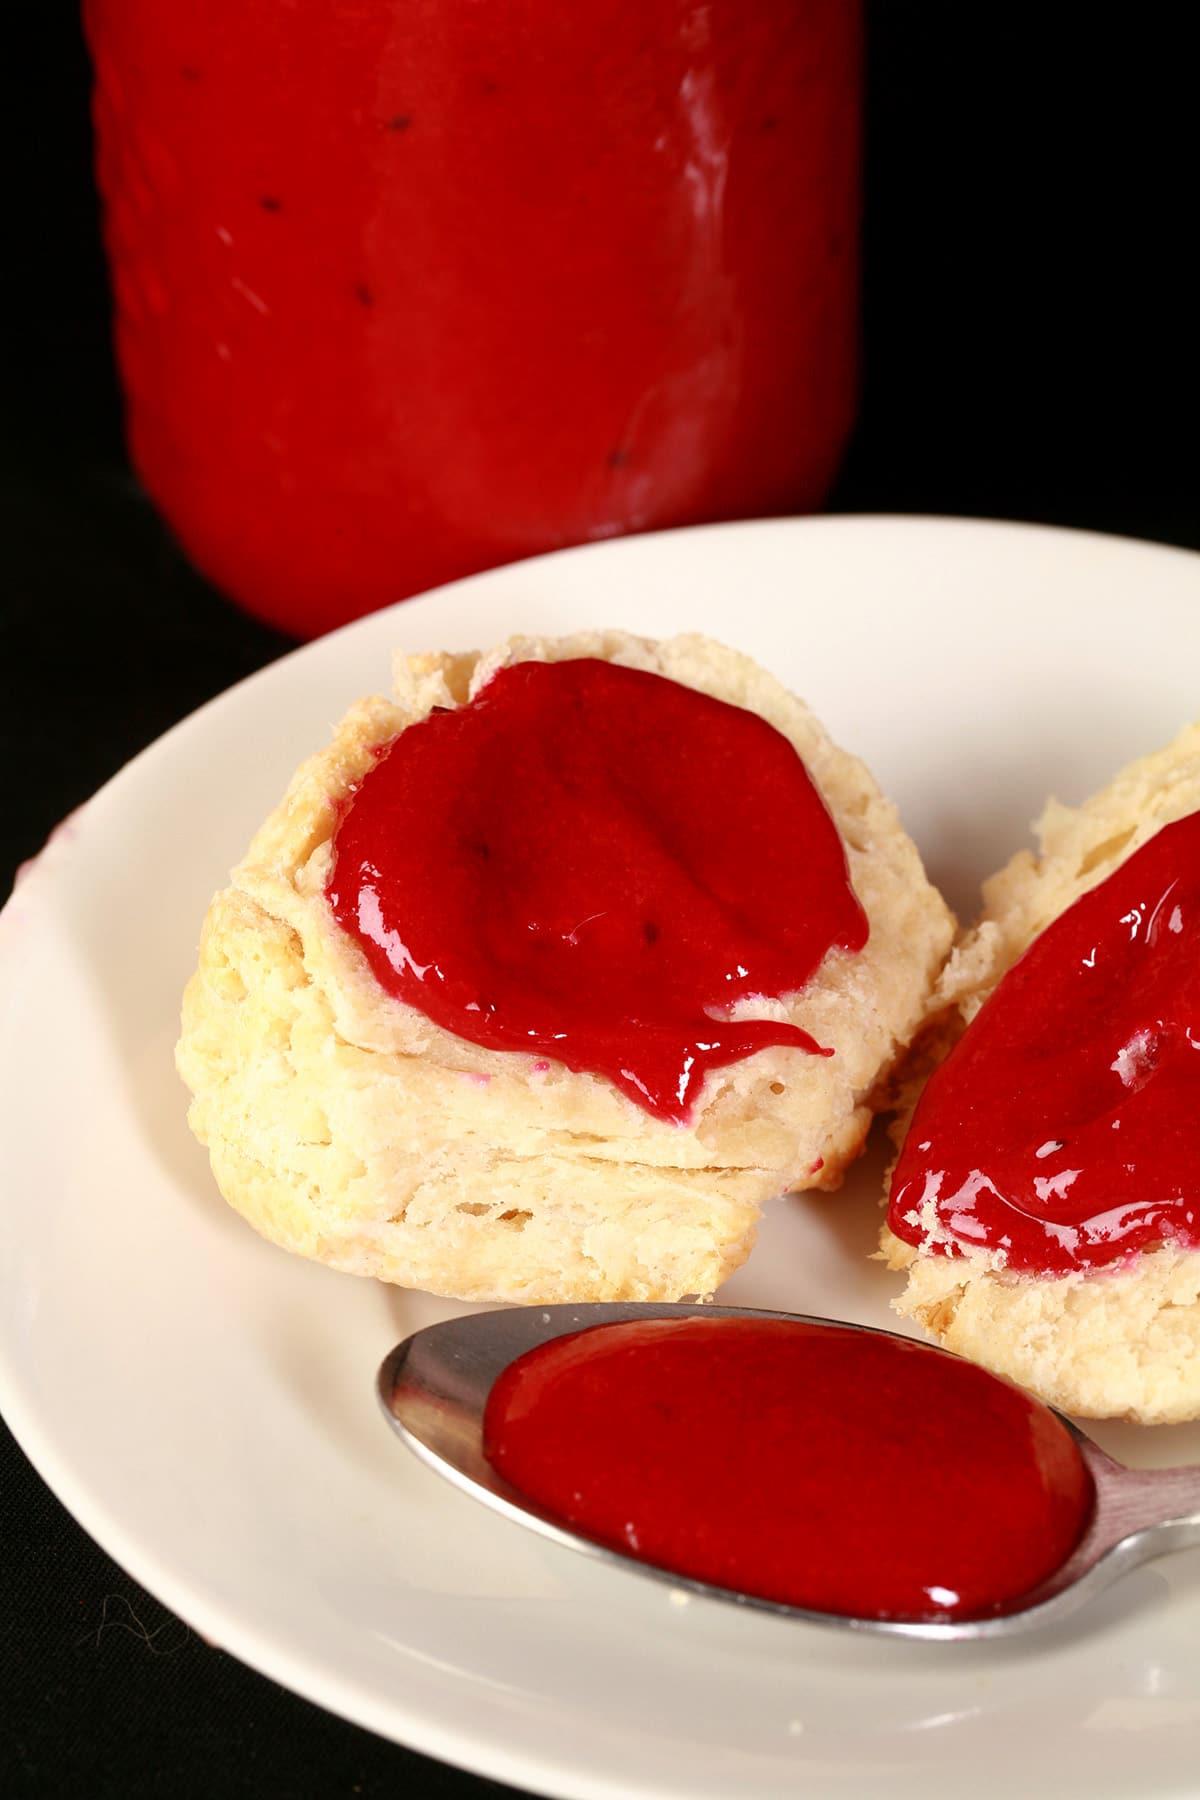 2 biscuits topped with blackcurrant curd, along with a spoon of the curd on the same plate.